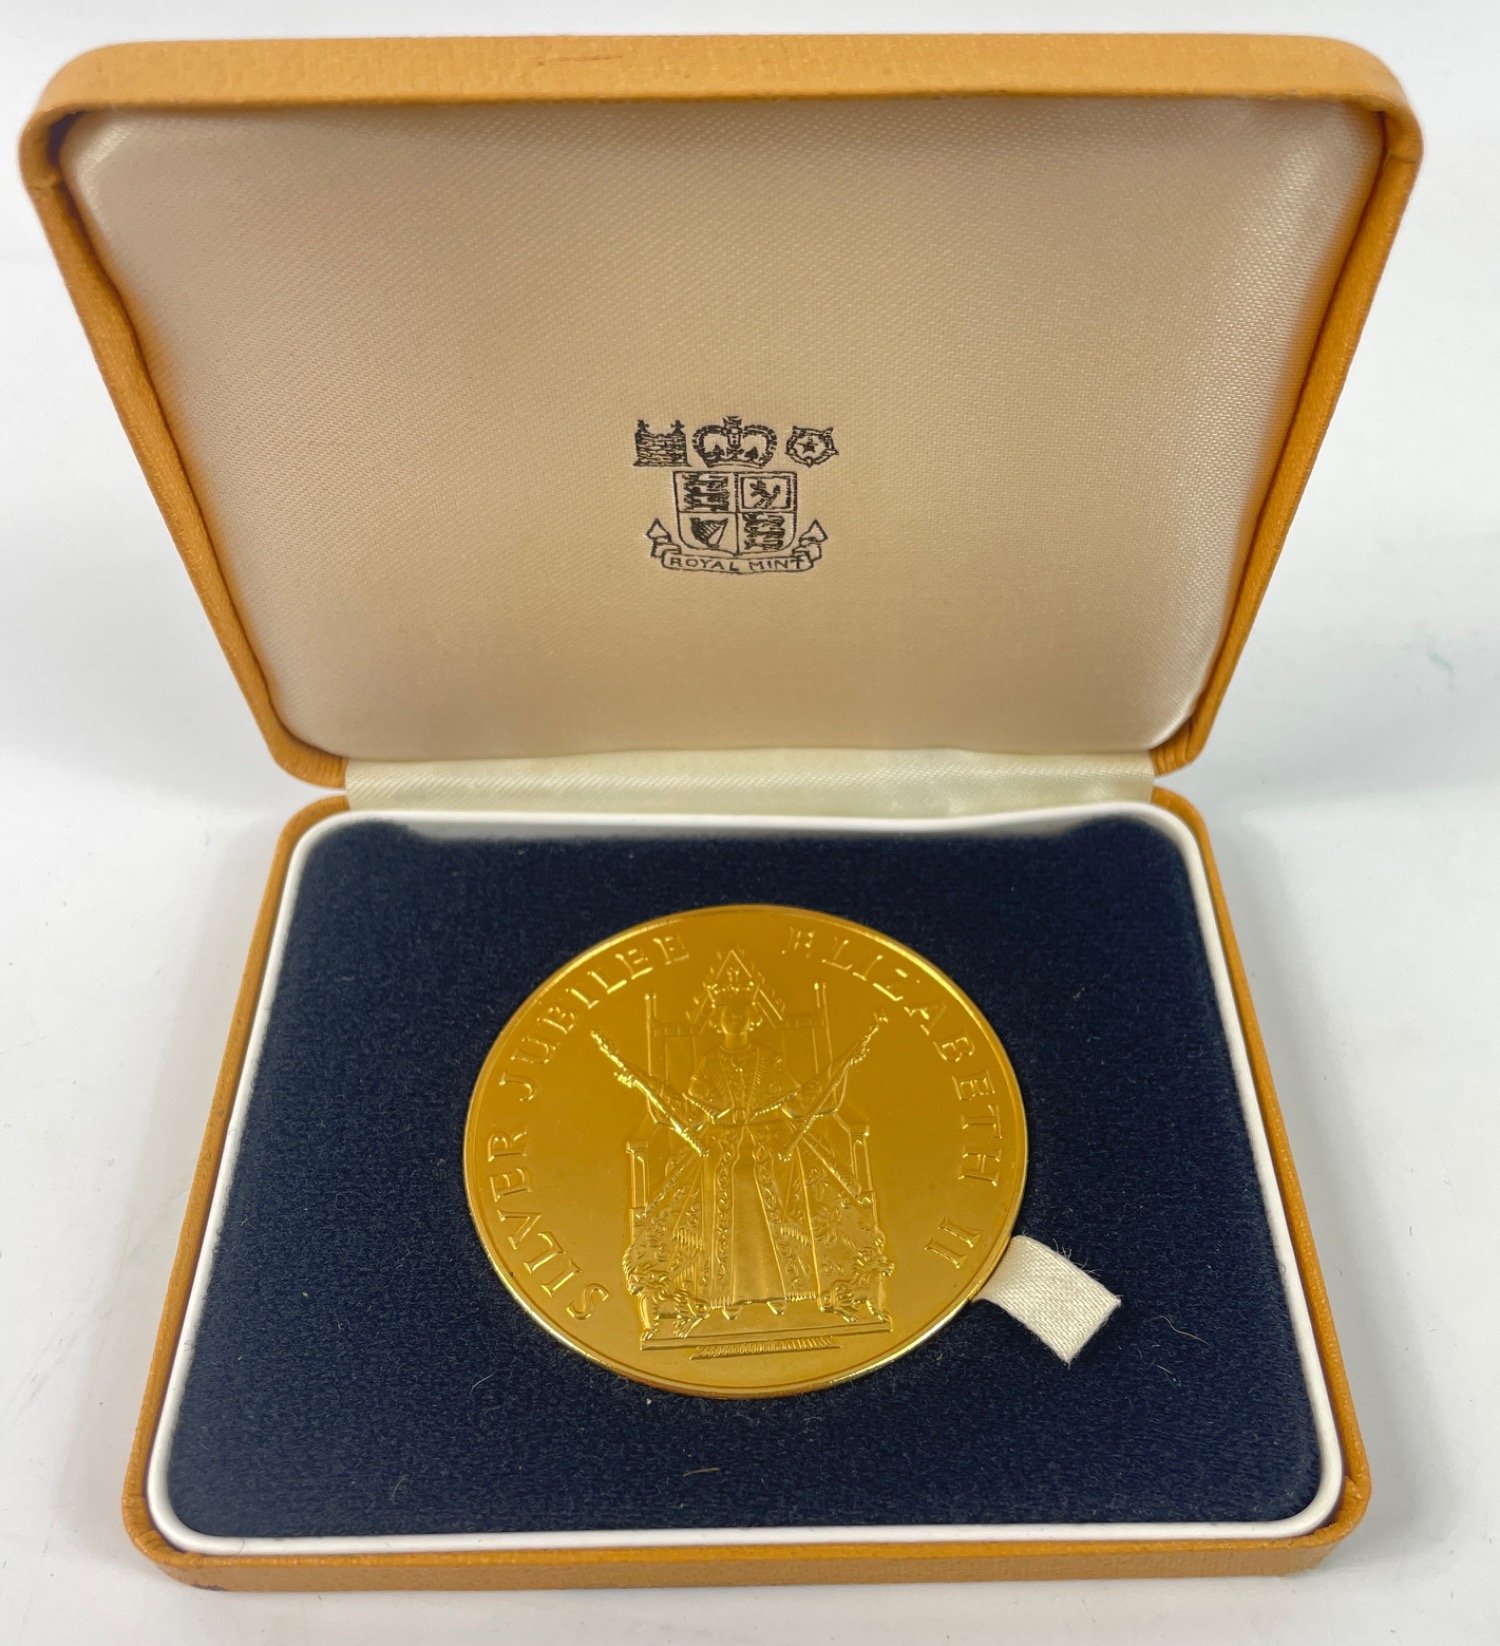 A Silver Jubilee Queen Elizabeth 1952- 1977 Commemorative gold plated coin within its original